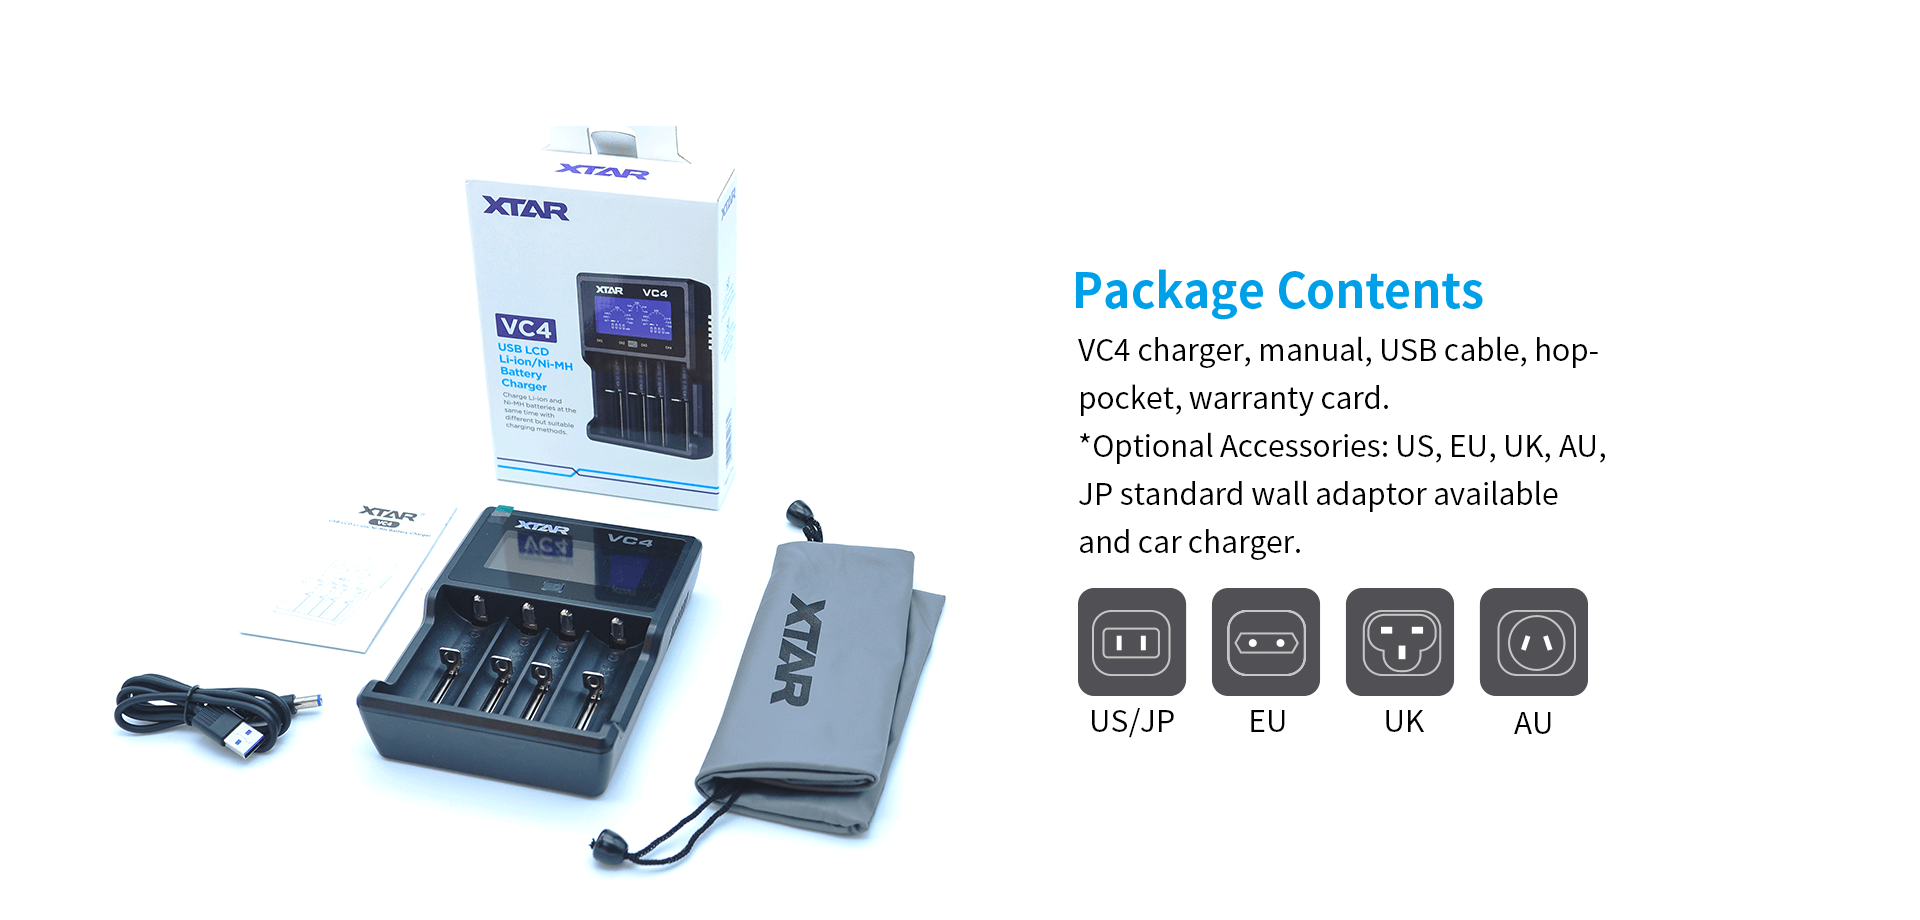 XTAR VC4 Charger | Packaging Contents